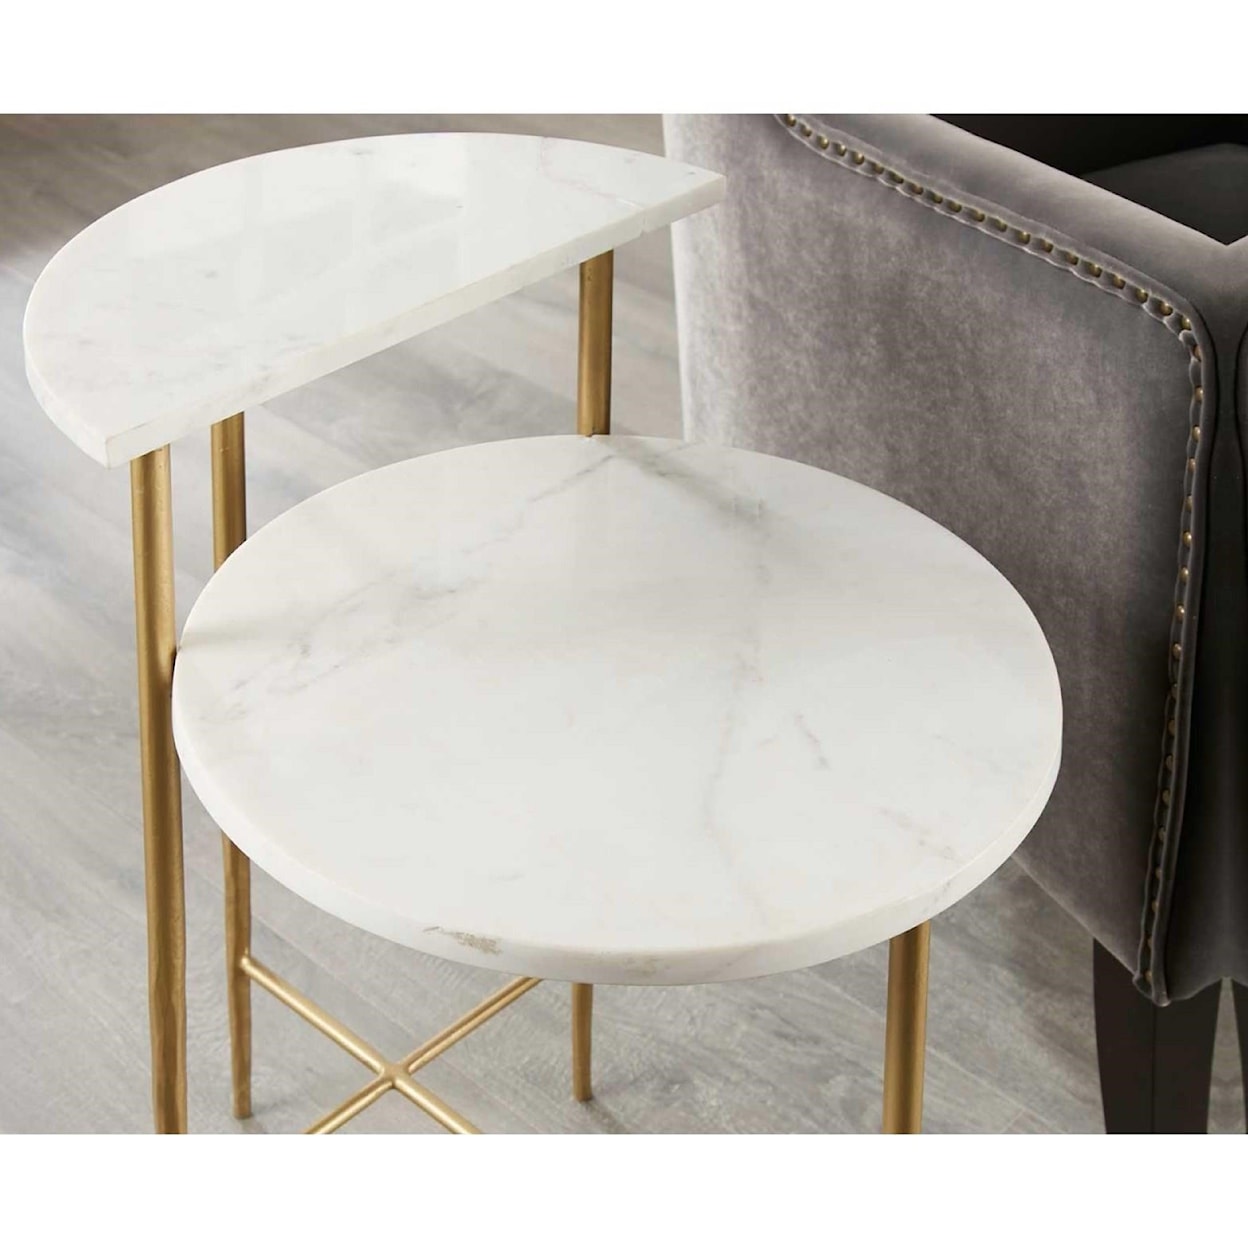 Prime Patna White Marble Top Table